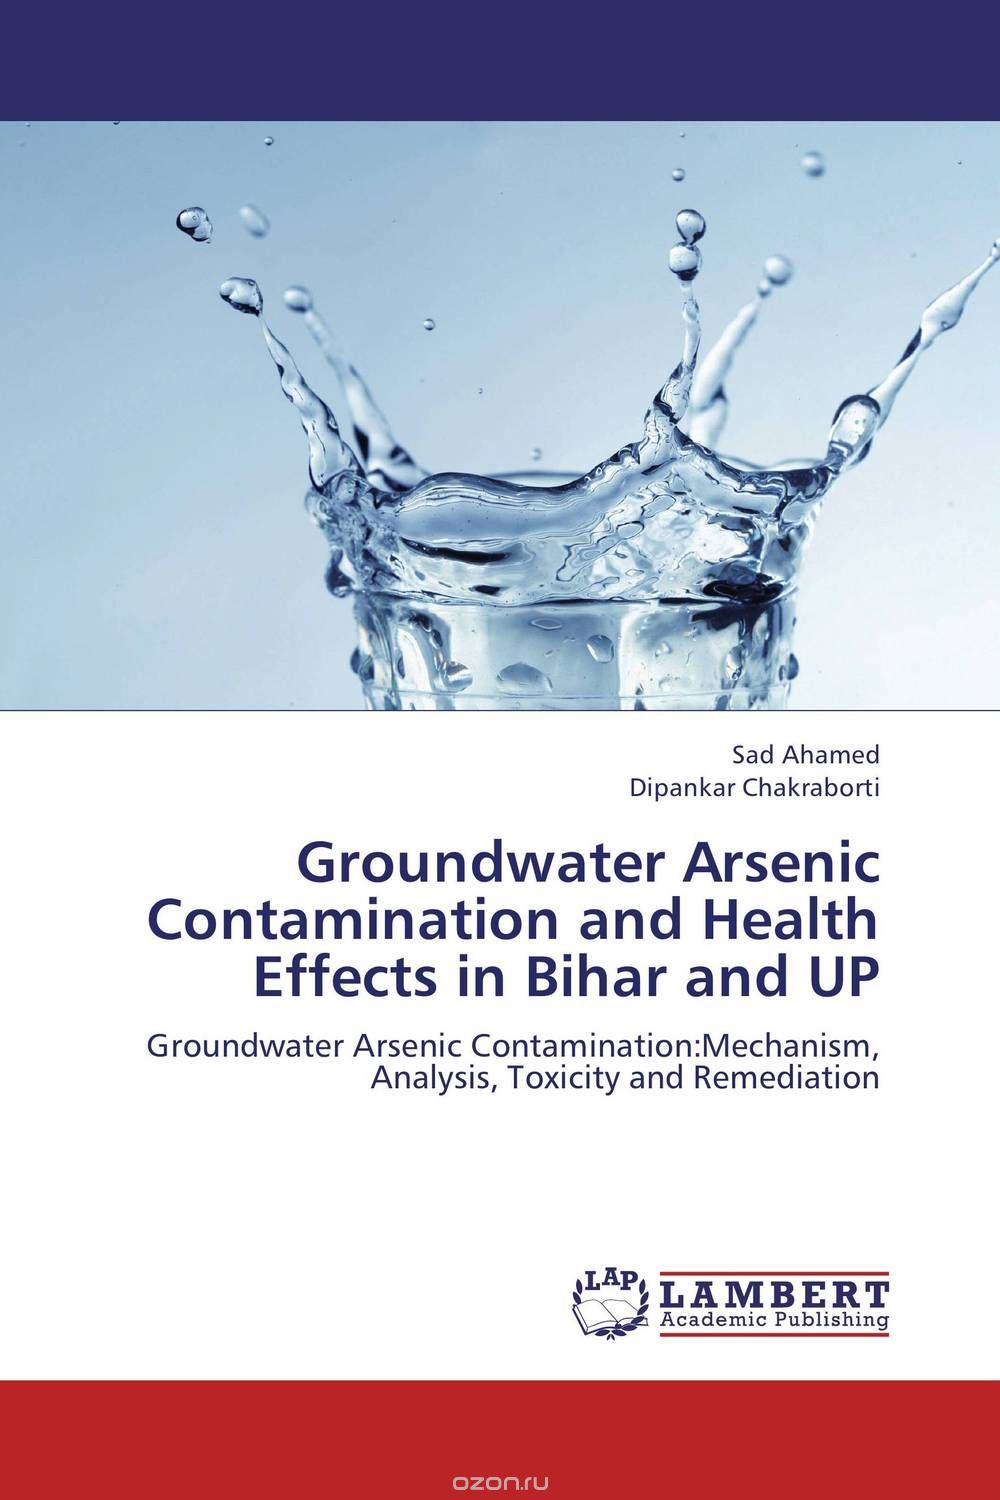 Groundwater Arsenic Contamination and Health Effects in Bihar and UP